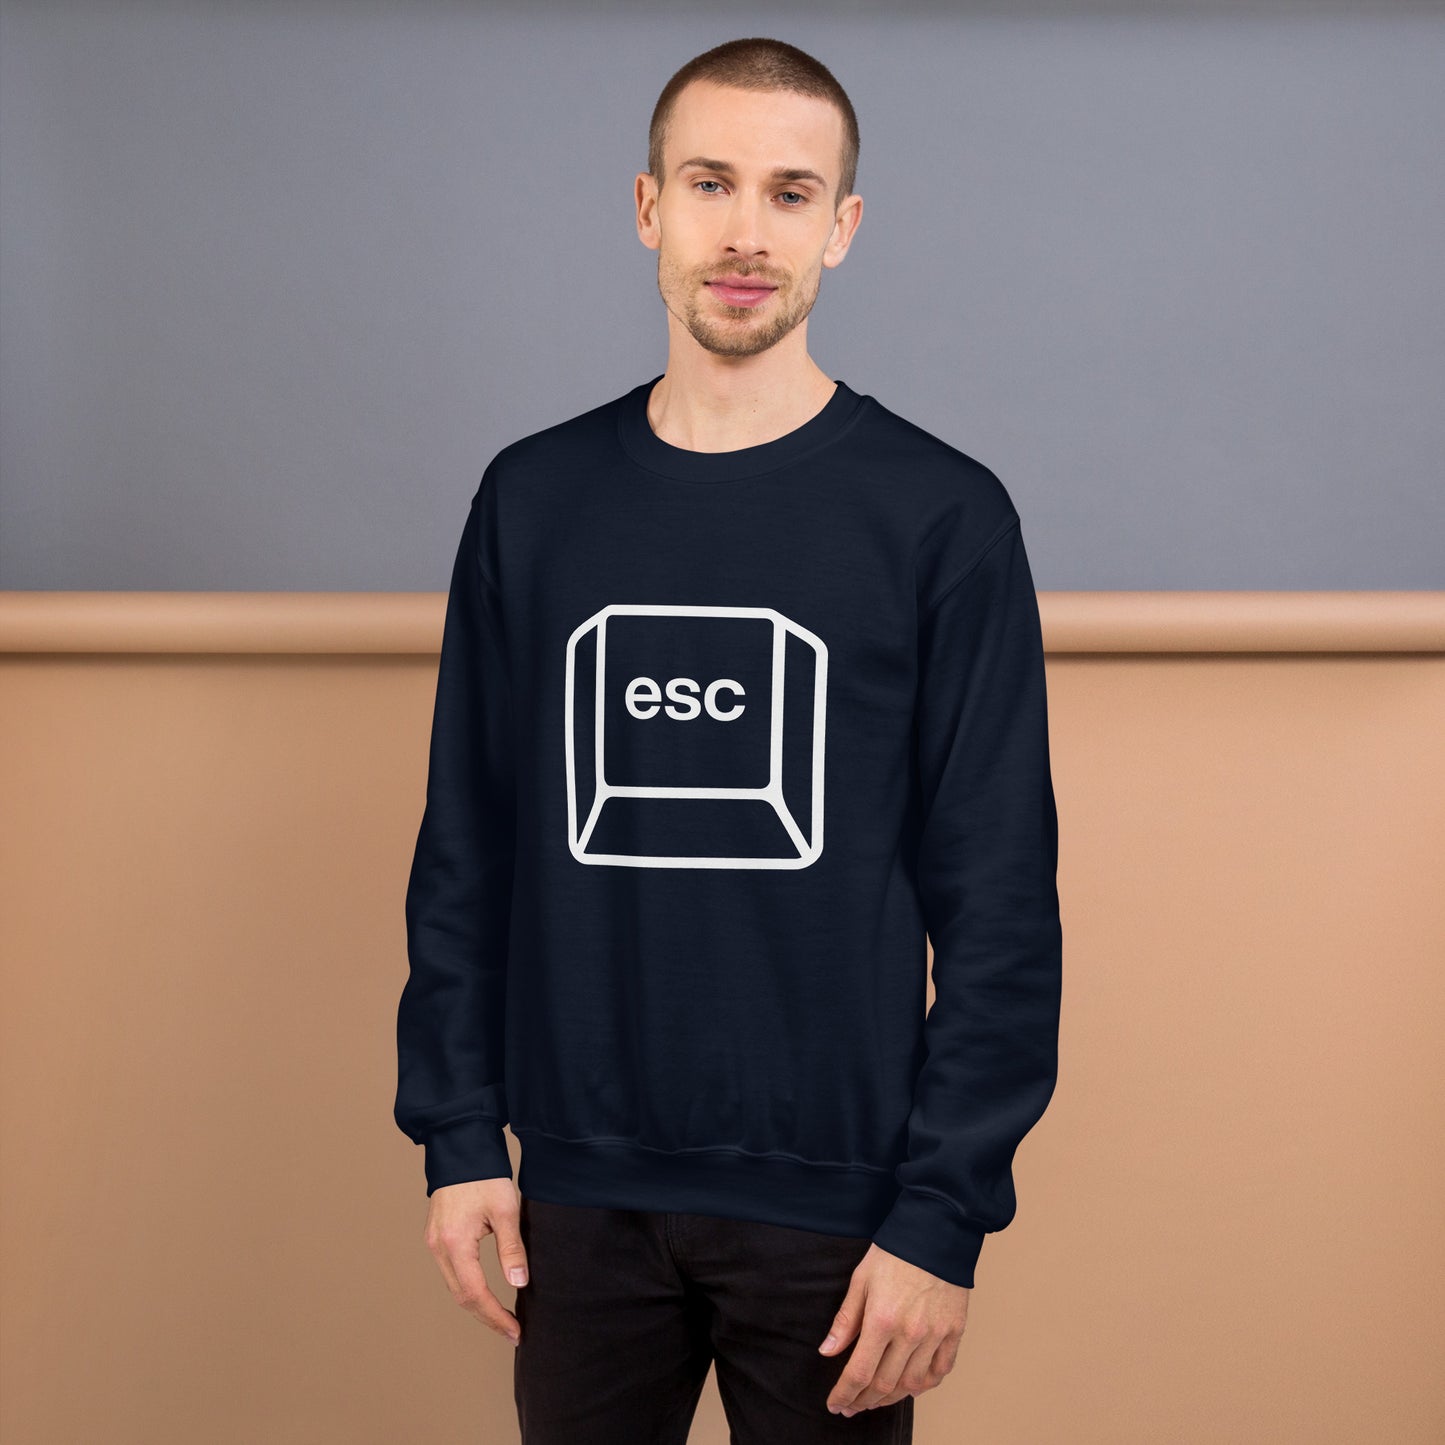 Man with navy blue sweatshirt with picture of esc key